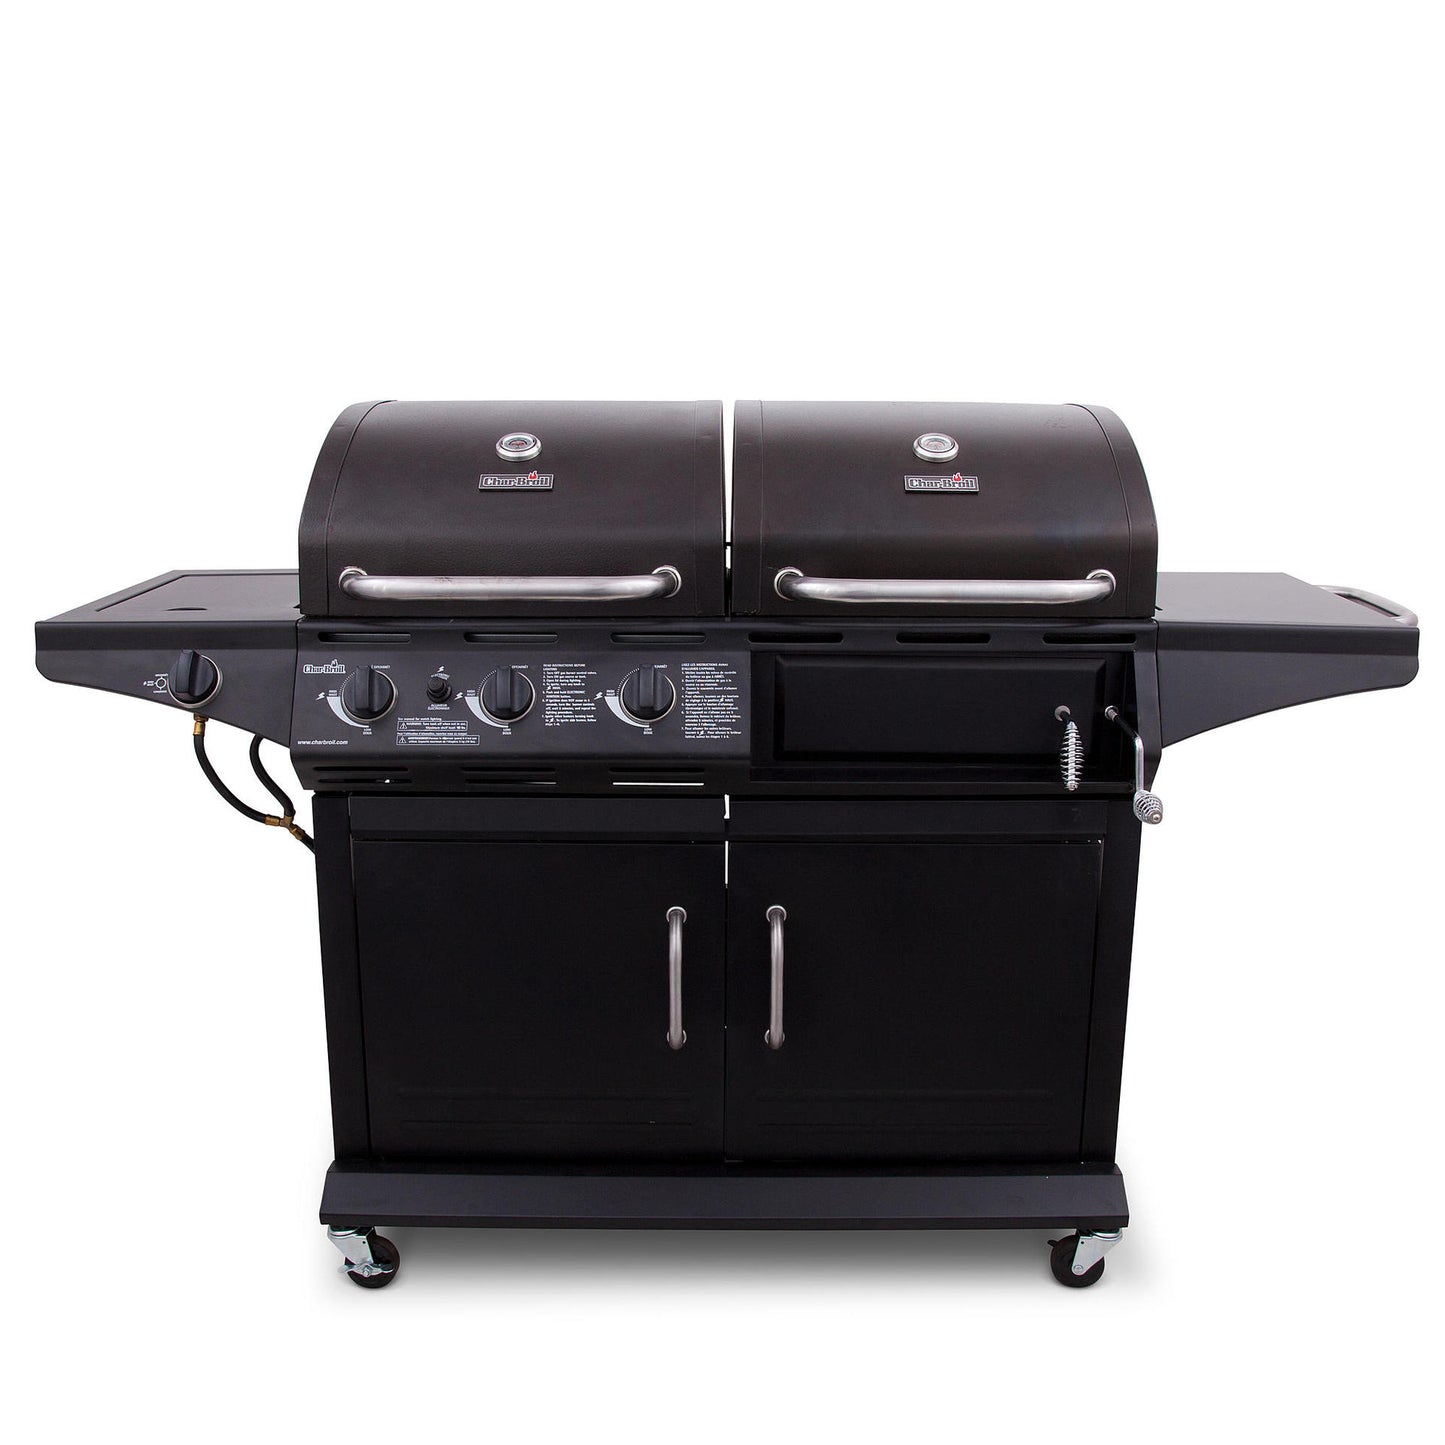 Mobile barbecue grill charcoal / gas grill temperature controlled oven 10-20 home wood stove